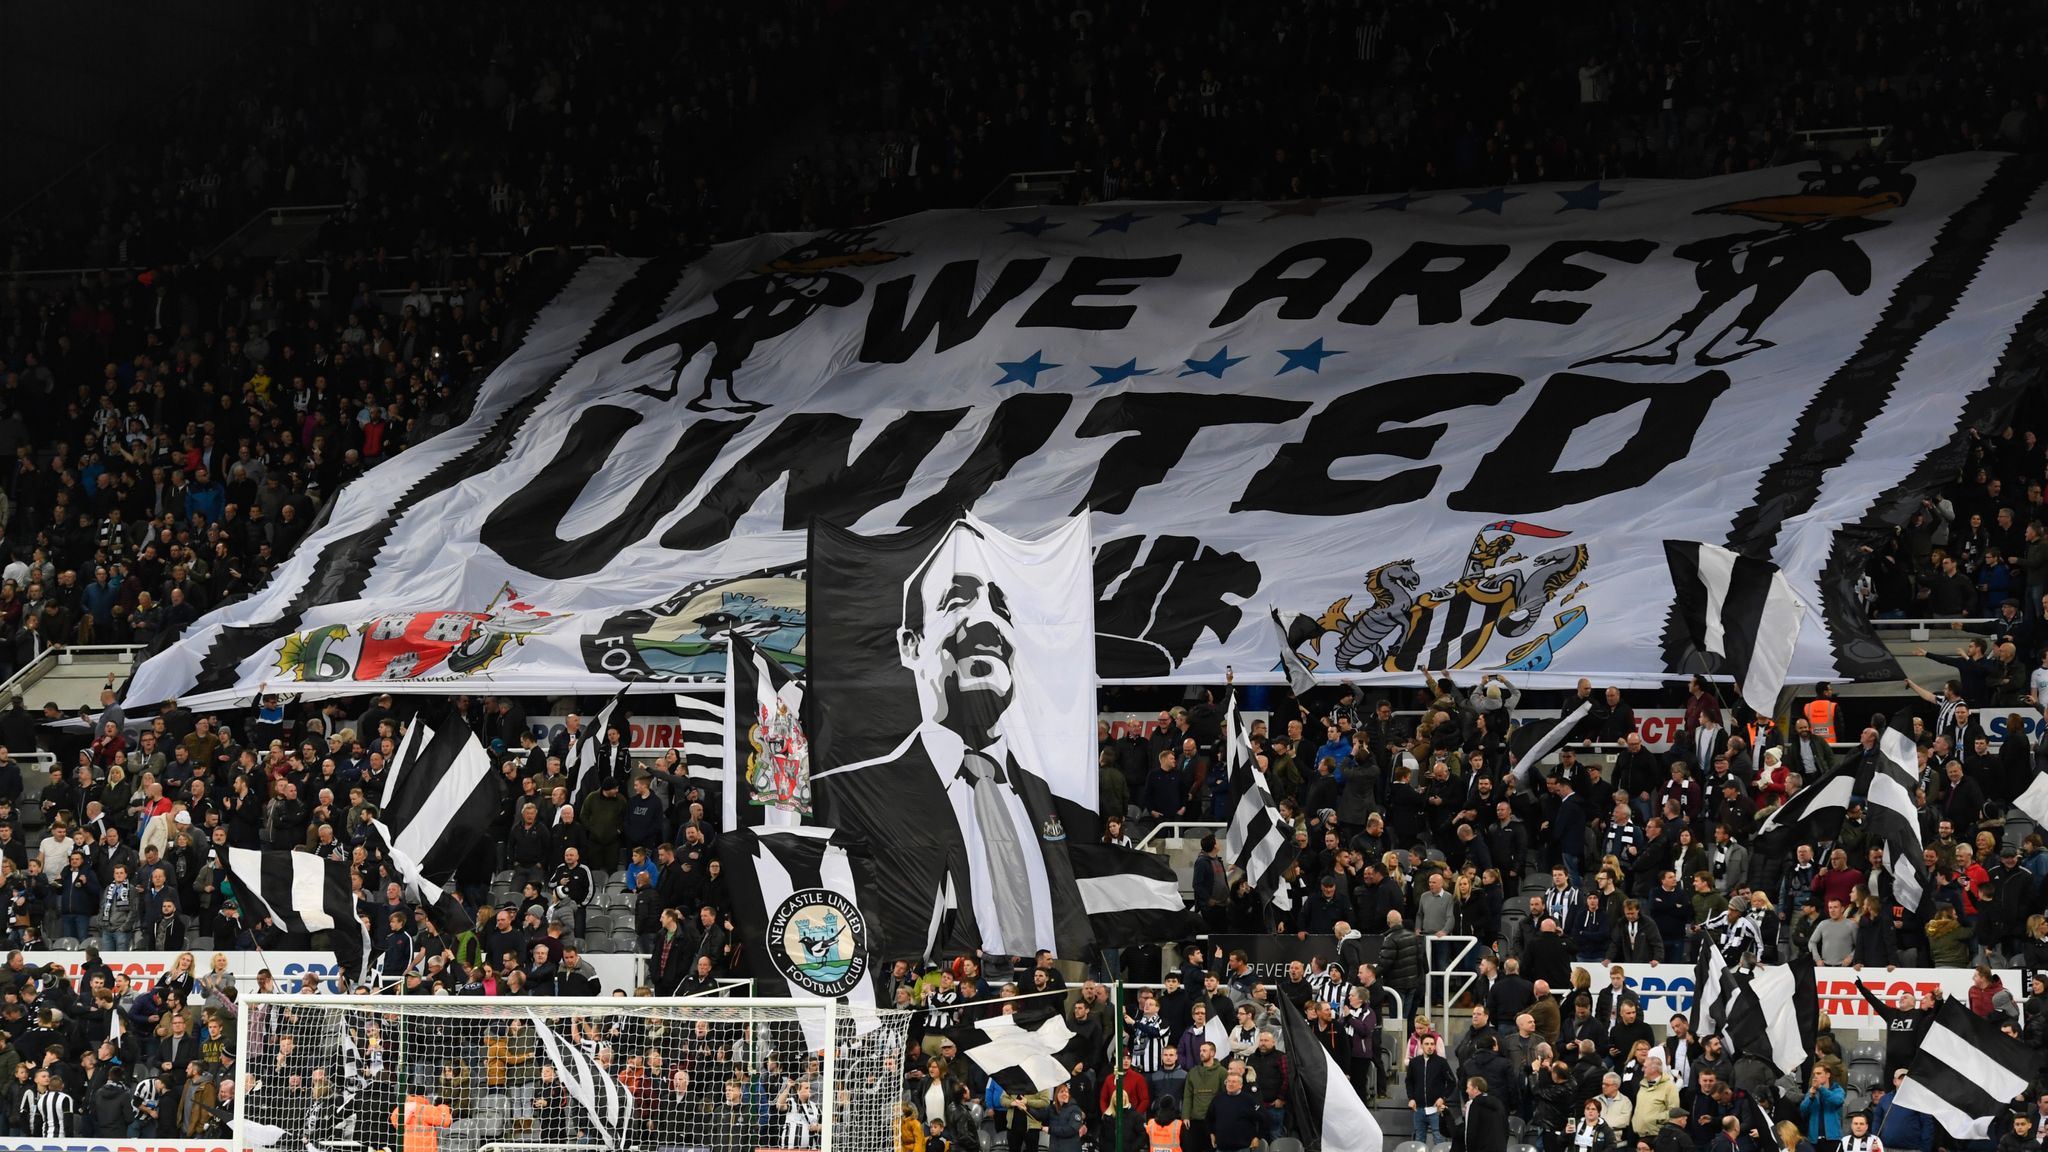 Newcastle plan West Ham game protest against owner Mike Ashley | Football News | Sky Sports